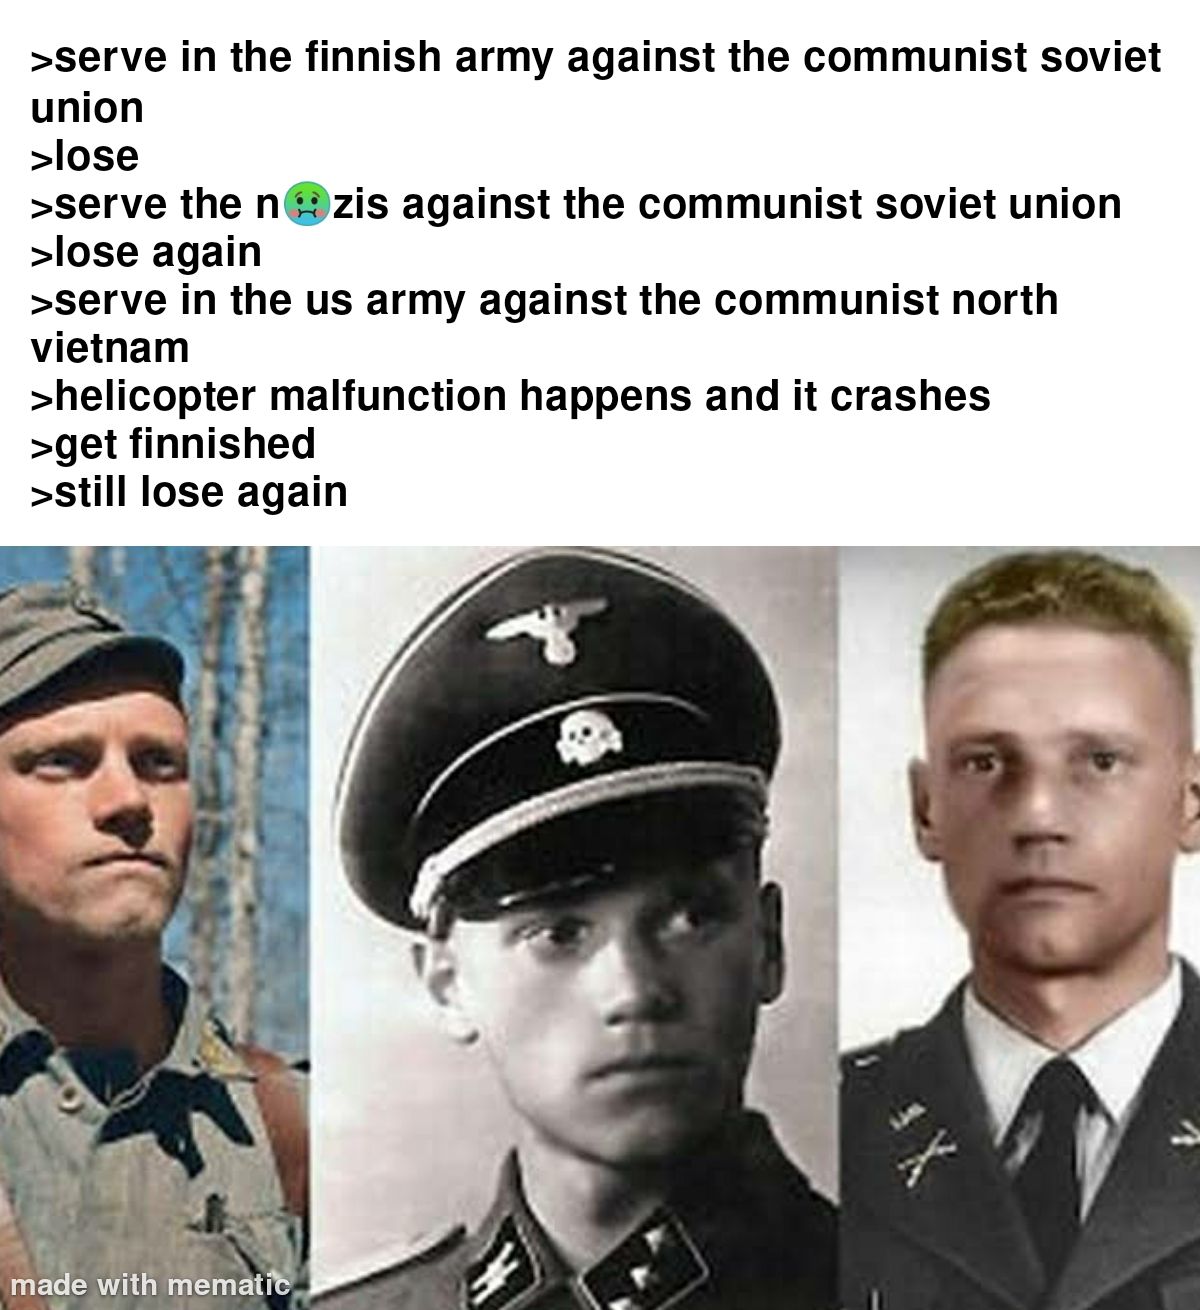 he fought for three countries against communism, even for the nazis, yet lost all of them